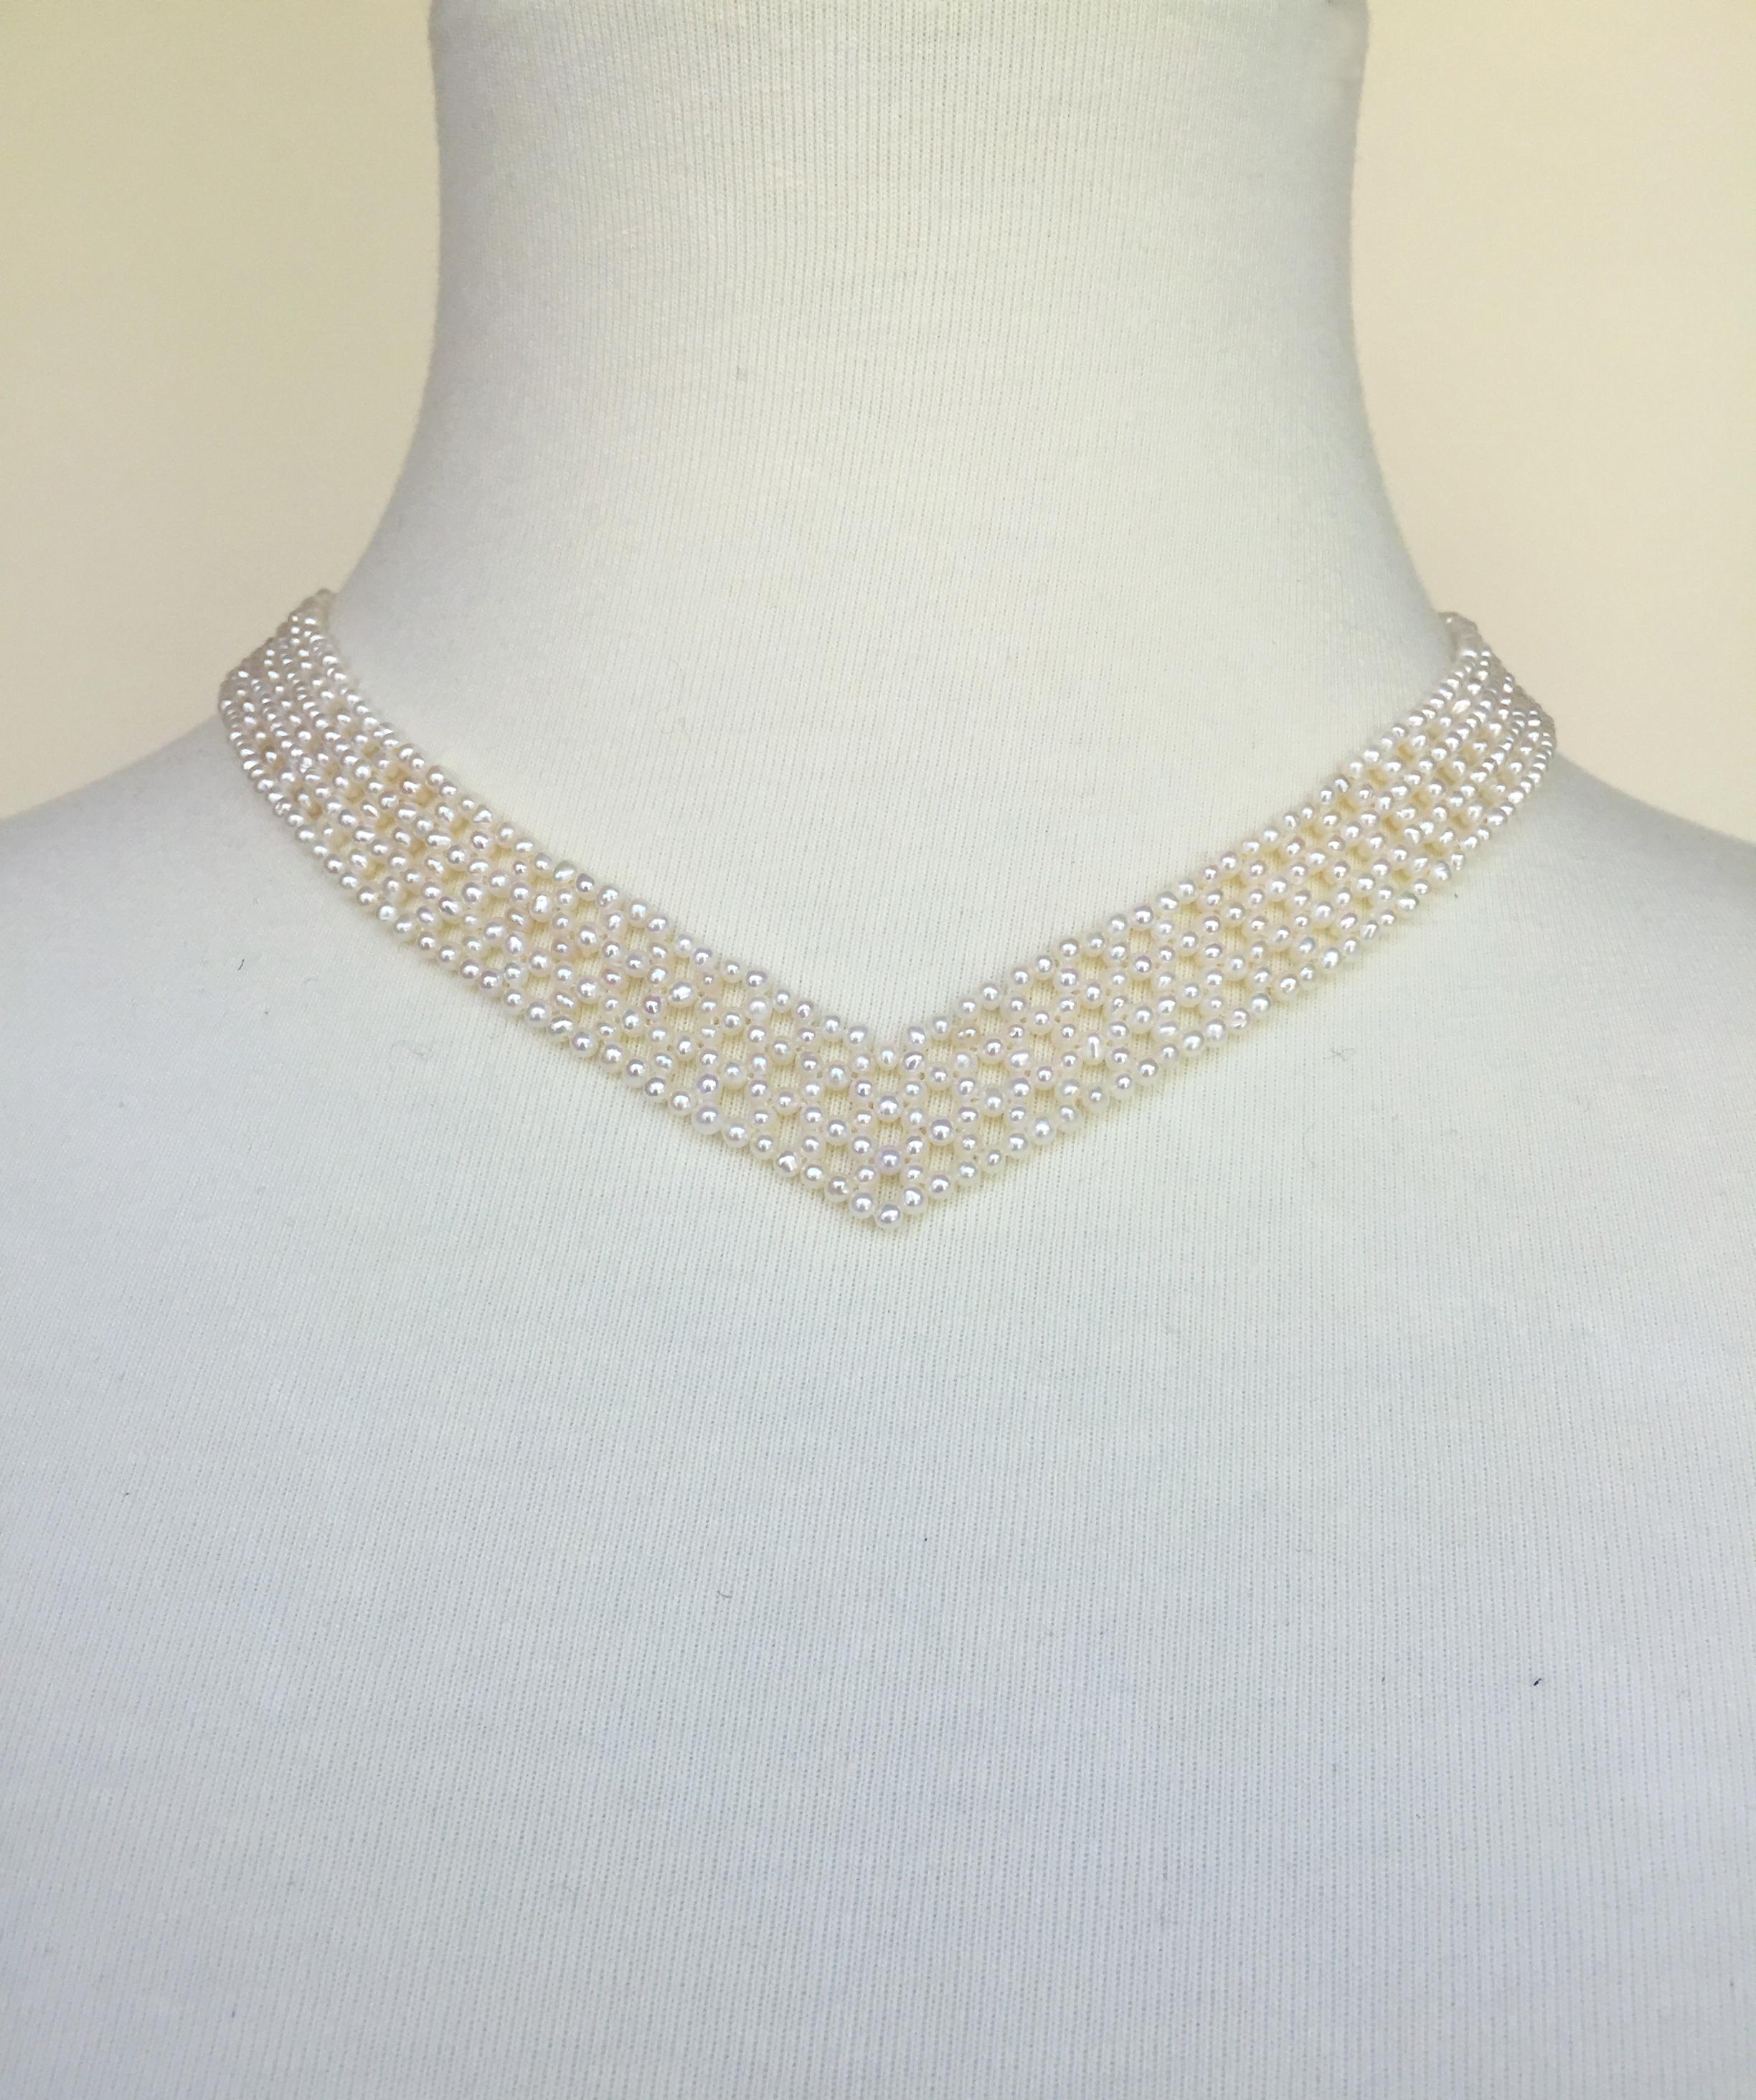 pearl necklace with brooch